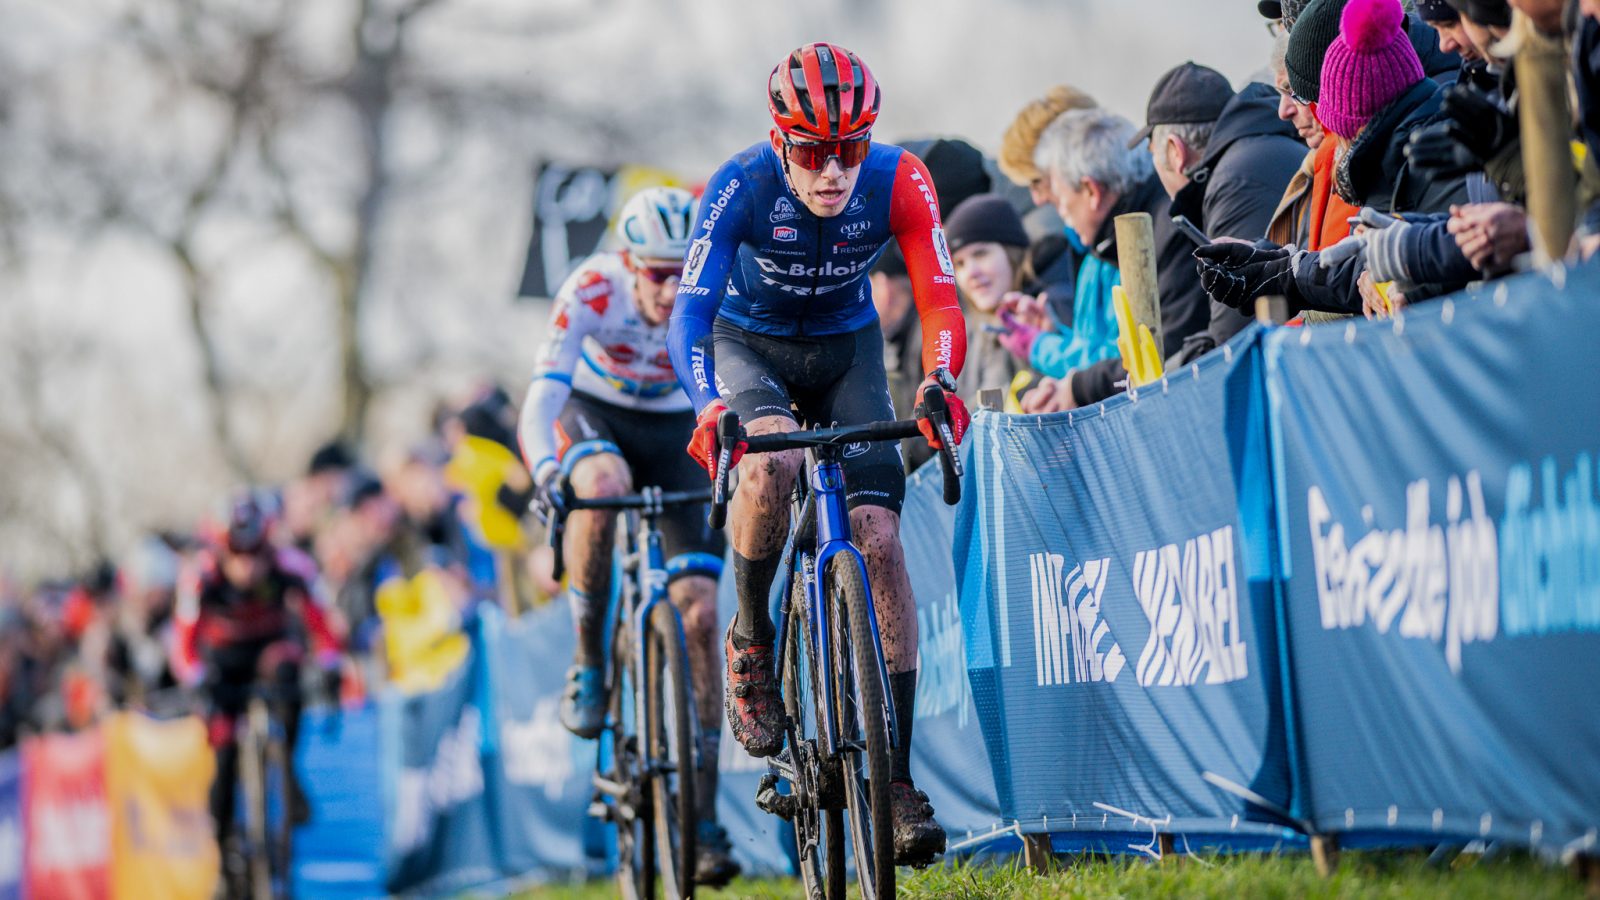 Dutch Pim Ronhaar pictured in action during the men elite race of the 'Flandriencross' cyclocross cycling event, stage 6/8 in the 'X20 Badkamers Trofee' competition, Saturday 28 January 2023 in Hamme, Belgium. BELGA PHOTO JASPER JACOBS